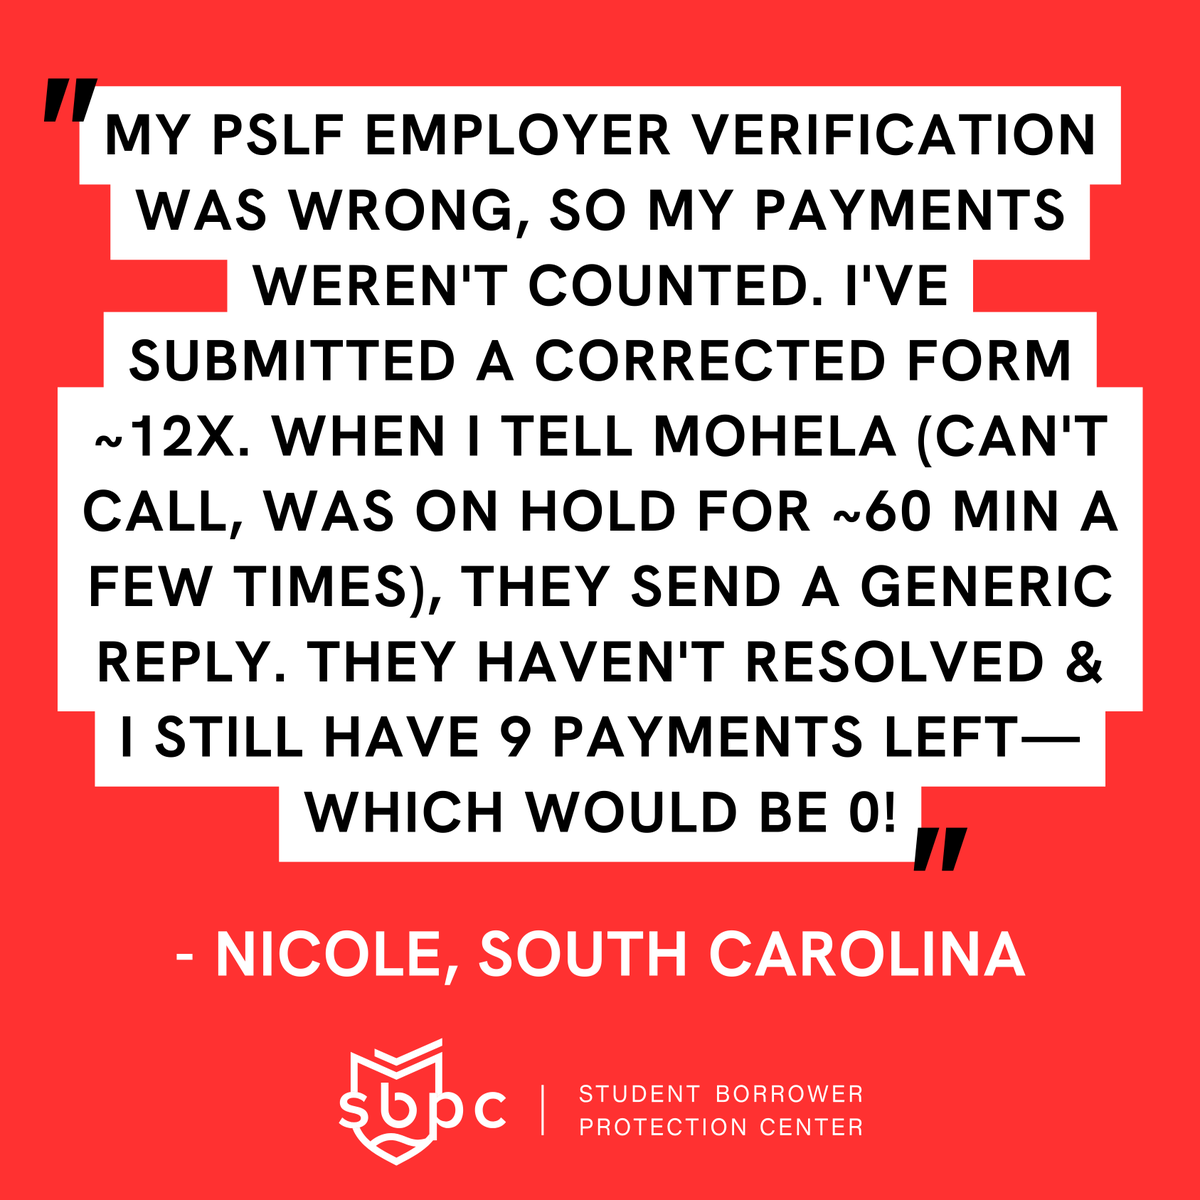 'My PSLF employer verification was wrong, so my payments weren't counted. I've submitted a corrected form ~12x. When I tell MOHELA (can't call, was on hold for ~60 min a few times), they send a generic reply. They haven't resolved & I still have 9 payments left—which would be 0!'